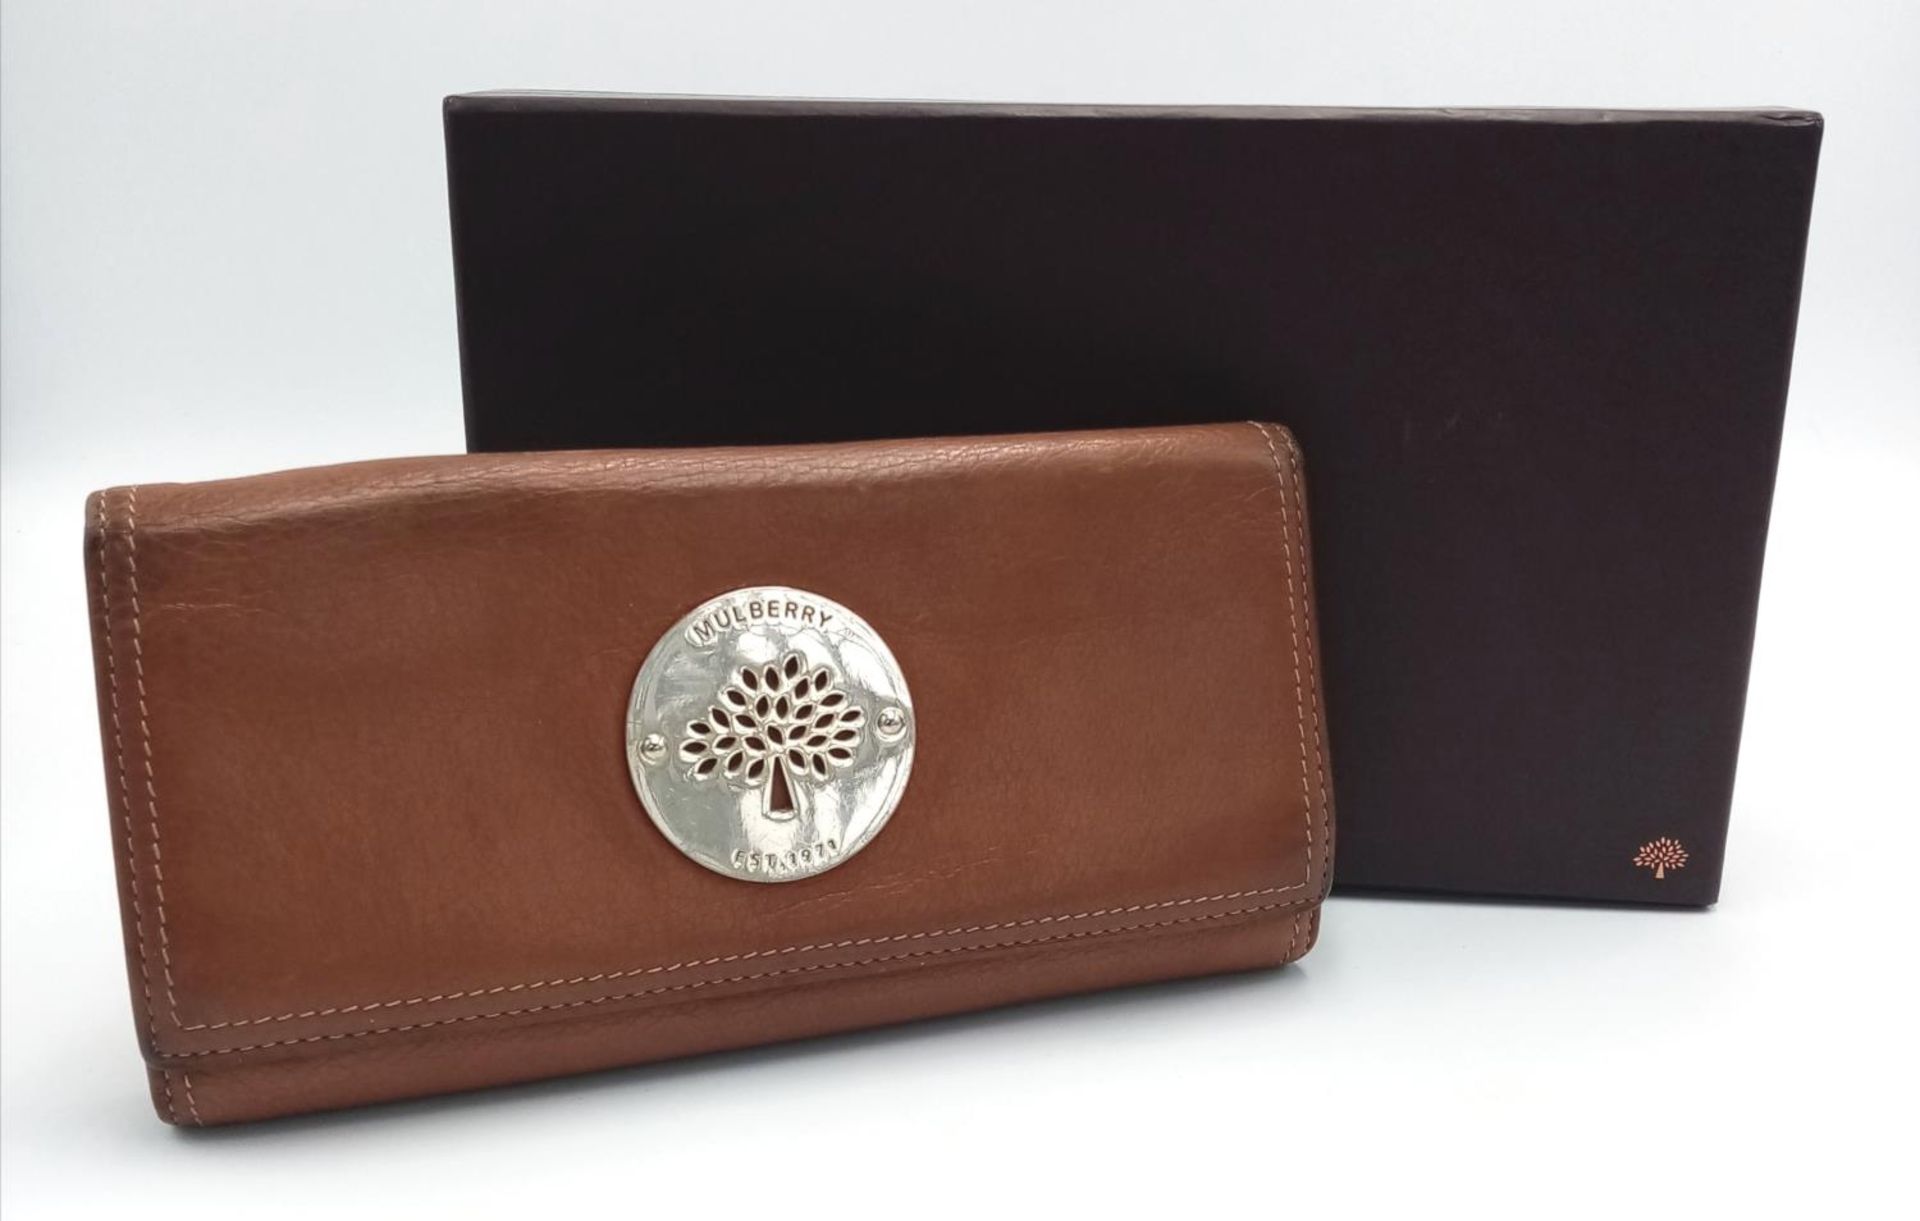 A Mulberry Brown Daria Continental Wallet. Leather exterior with gold-toned hardware, a zipped